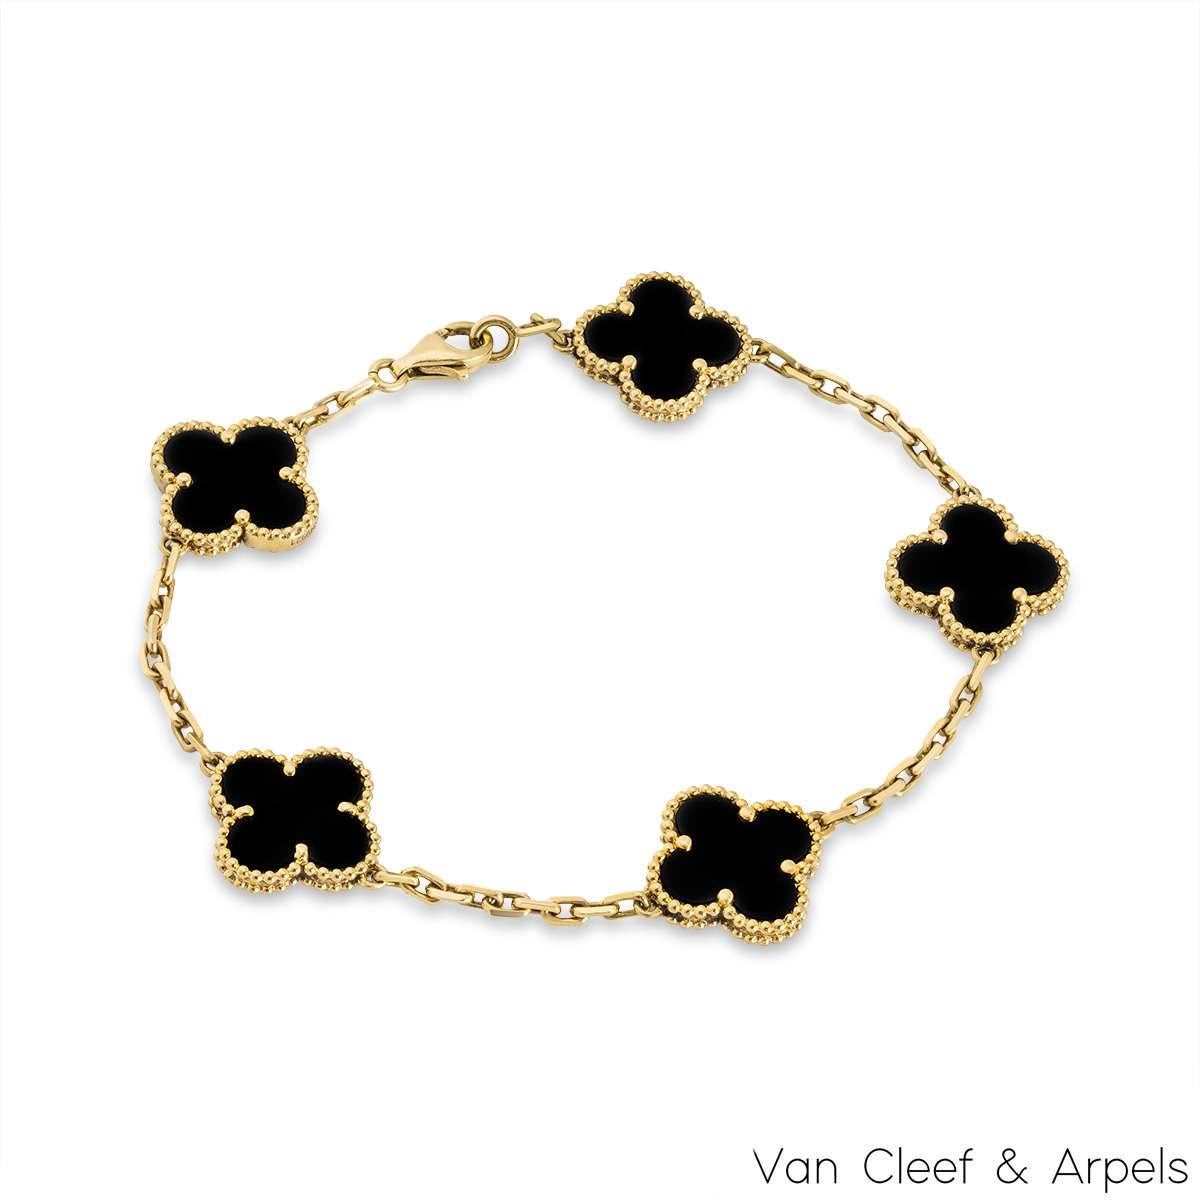 A timeless 18k yellow gold onyx bracelet, from the Vintage Alhambra collection by Van Cleef and Arpels. The bracelet is made up of 5 iconic clover motifs, each set with a beaded edge and a black onyx inlay. Measuring 7.5 inches in length, the